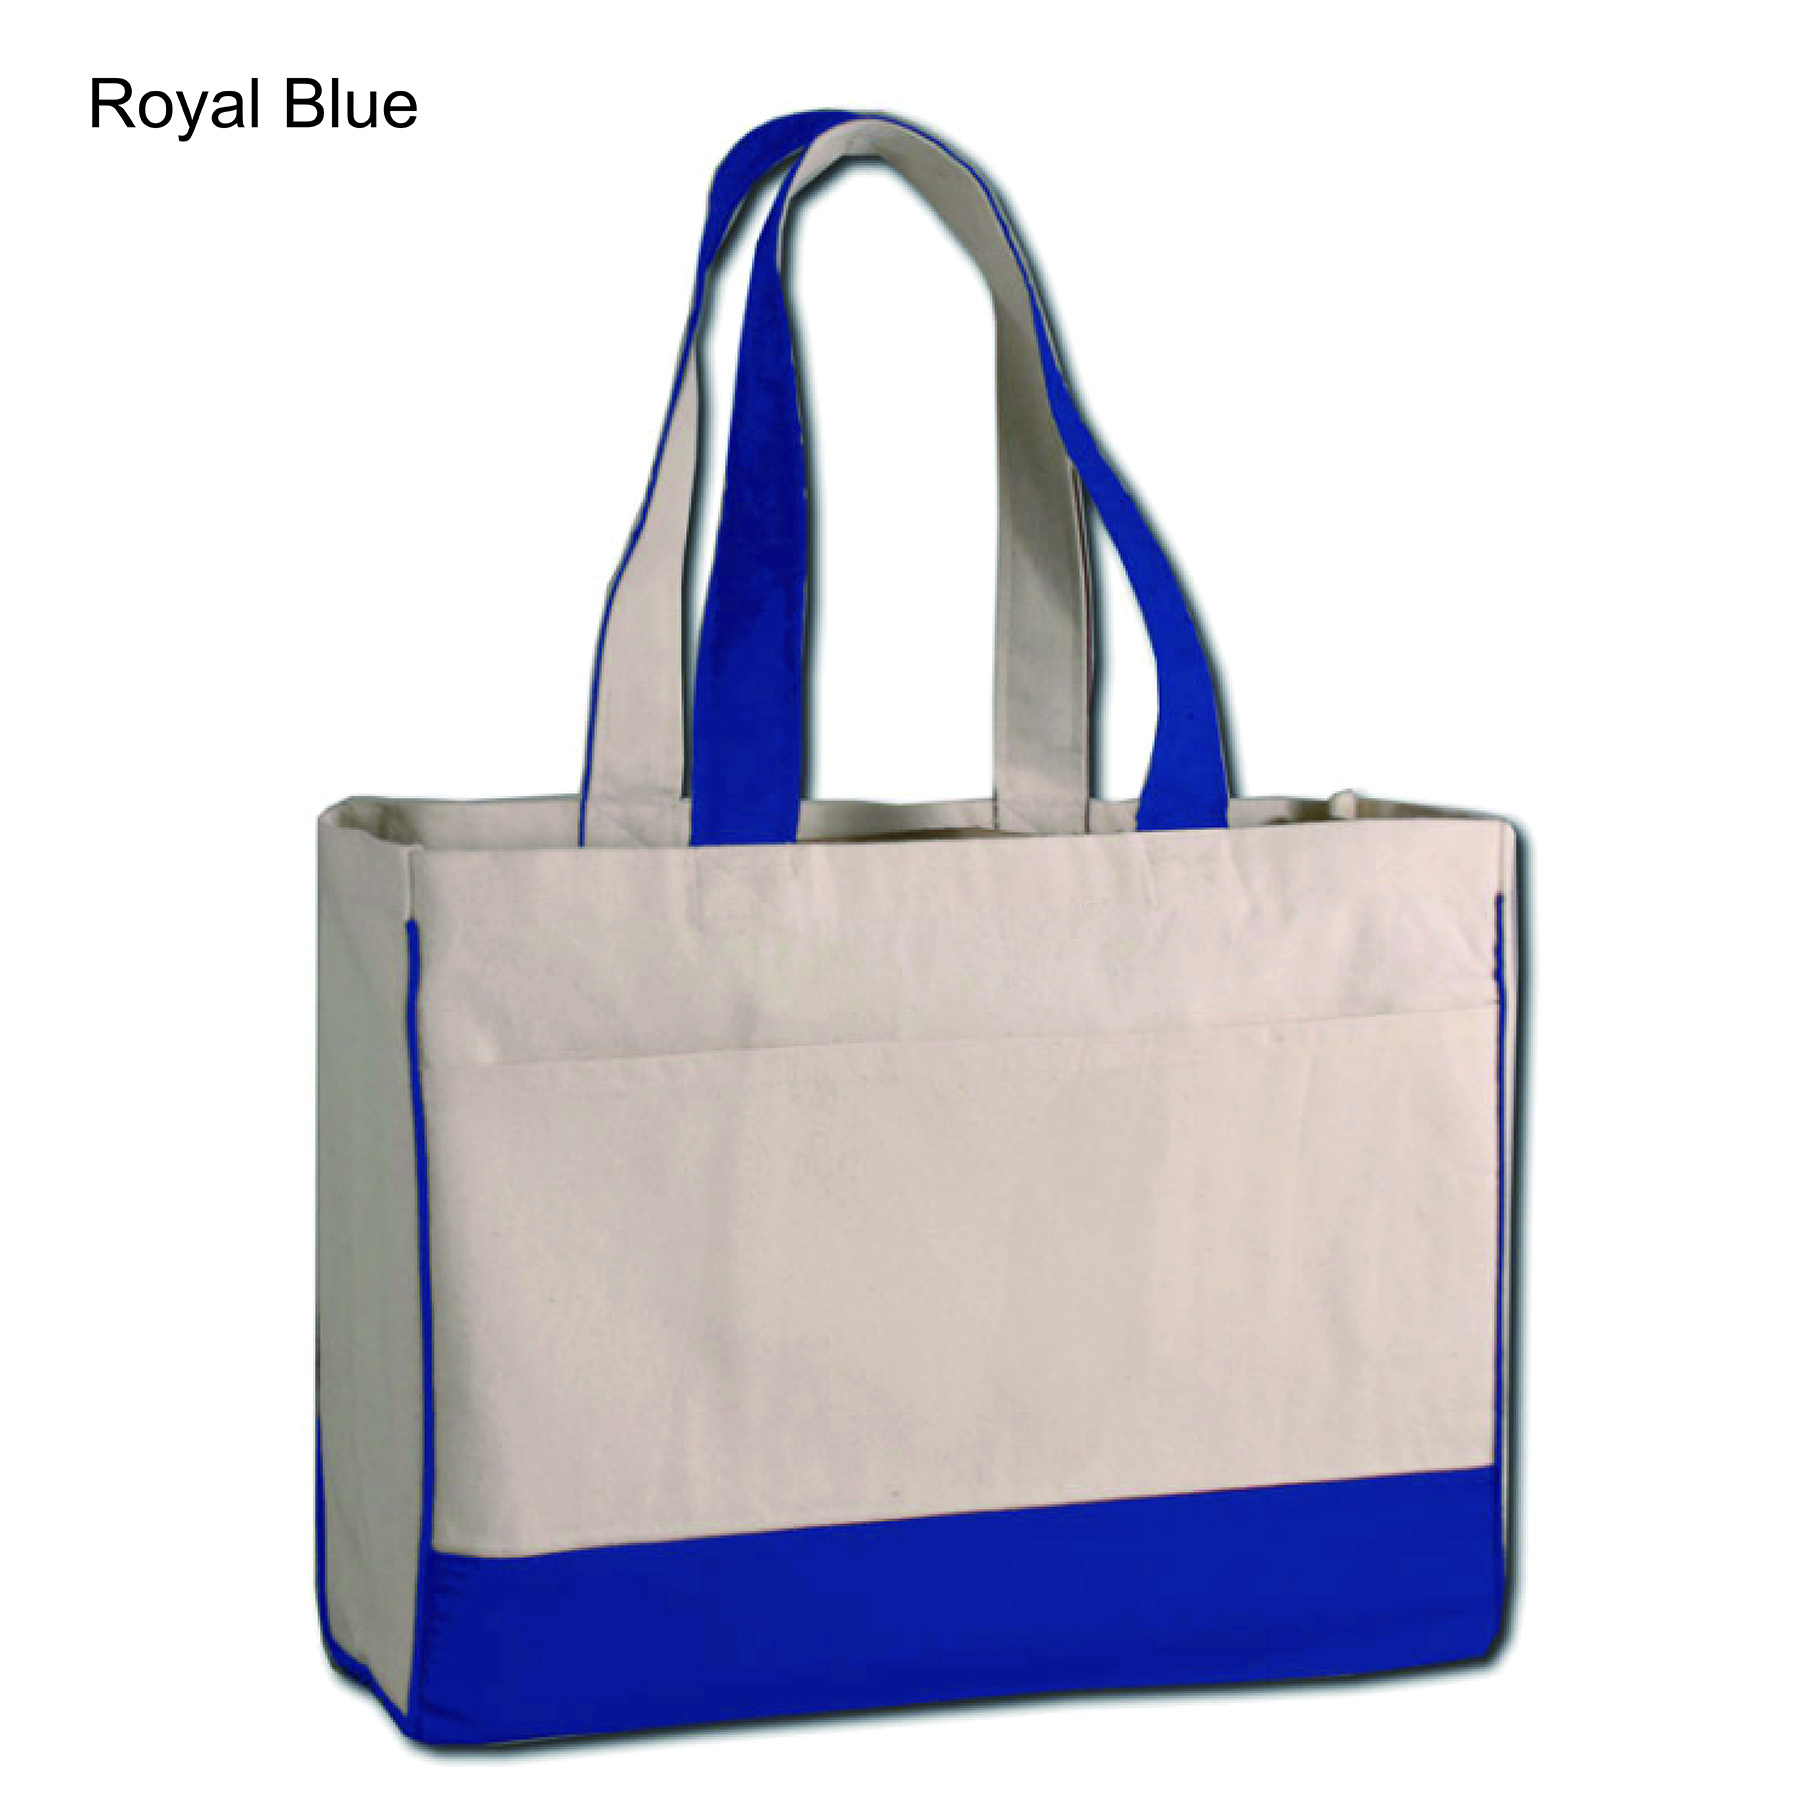 Two-Tone Canvas Tote Bag